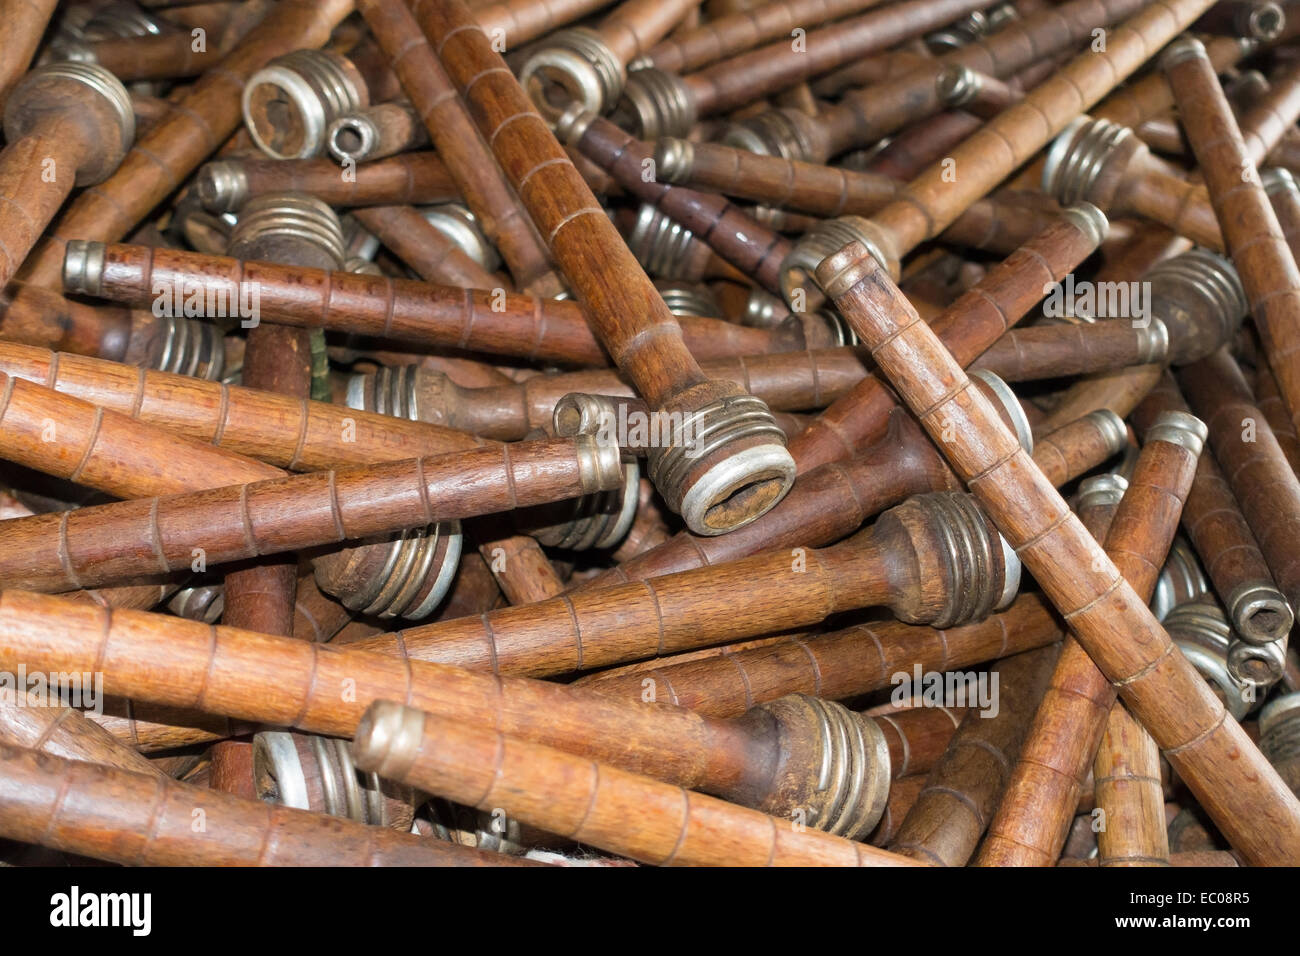 A pile of old wooden bobbins used in a cotton mill in Yorkshire, England. Stock Photo